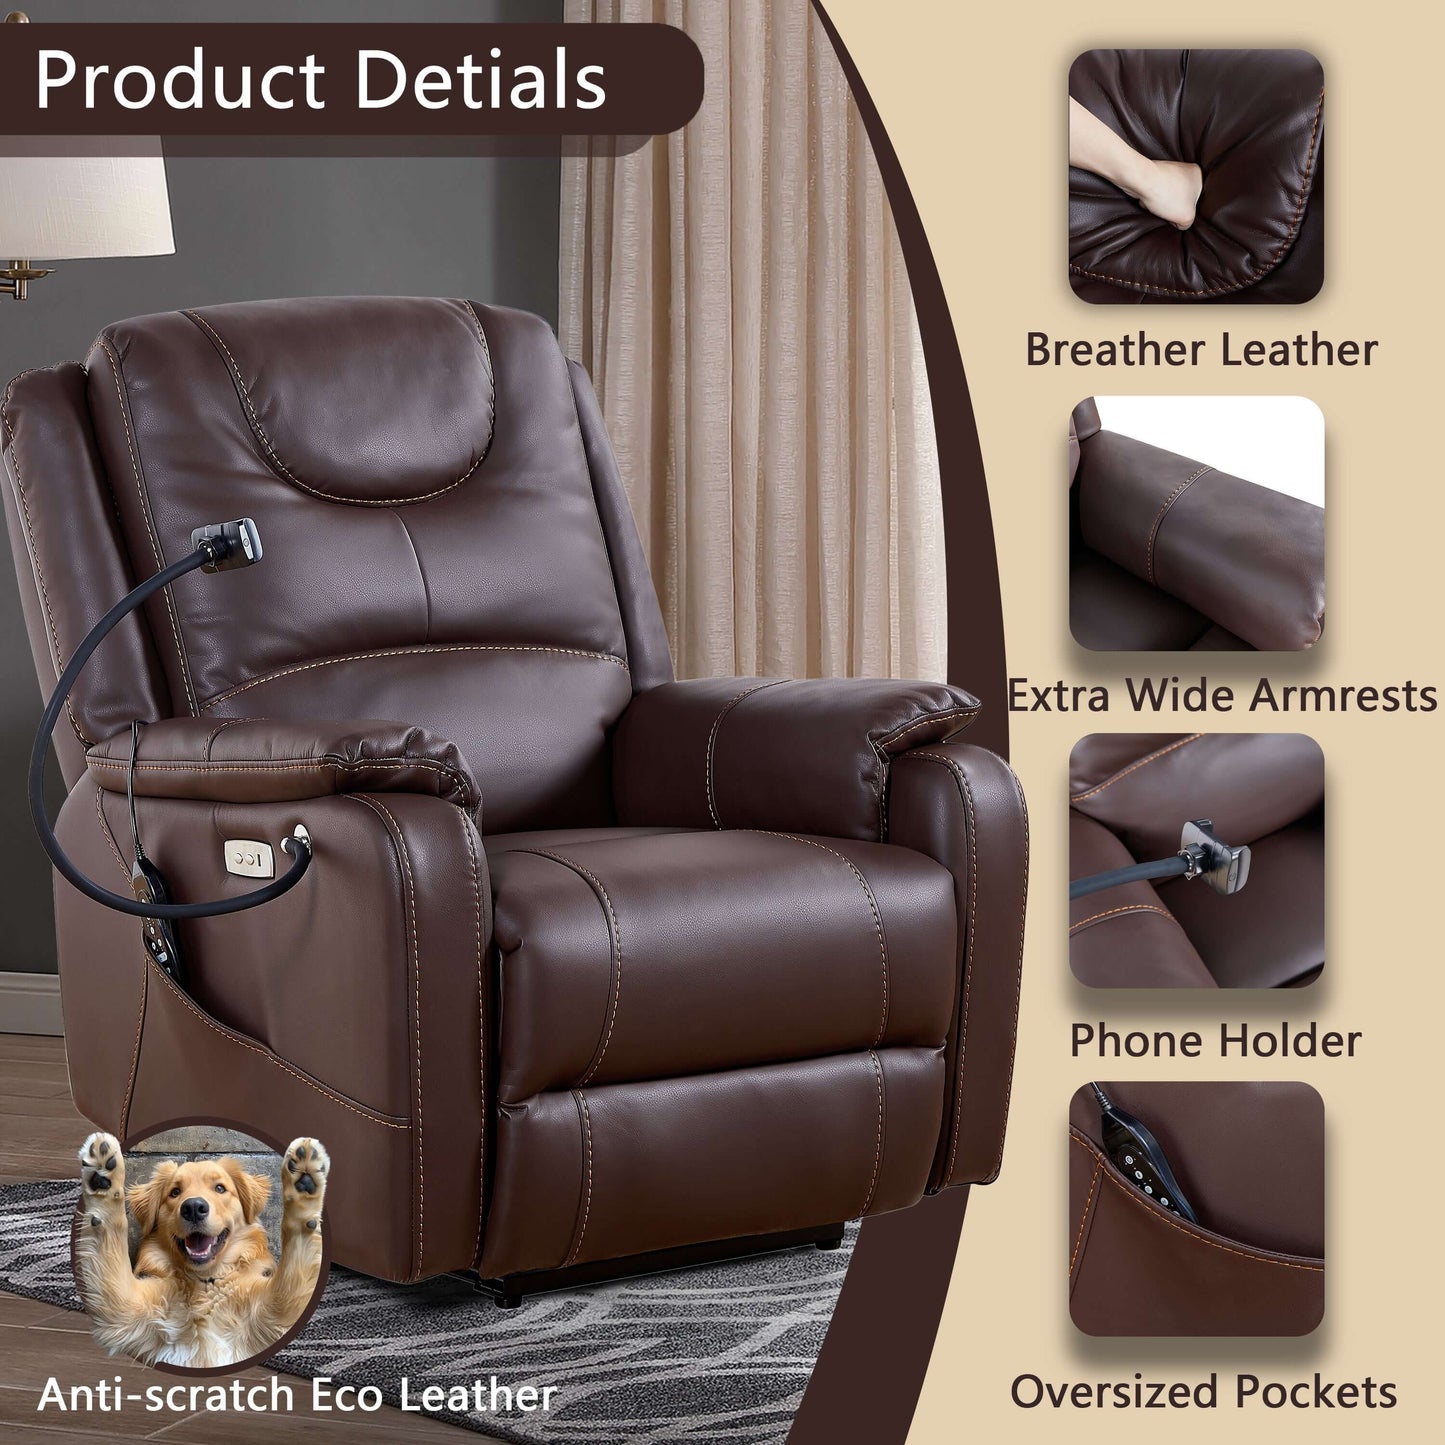 Power Zero Gravity Chair: Electric Recliner with Heat and Massage, Side Pockets,USB Port - Scratch Resistant Eco Leather Reddish Brown